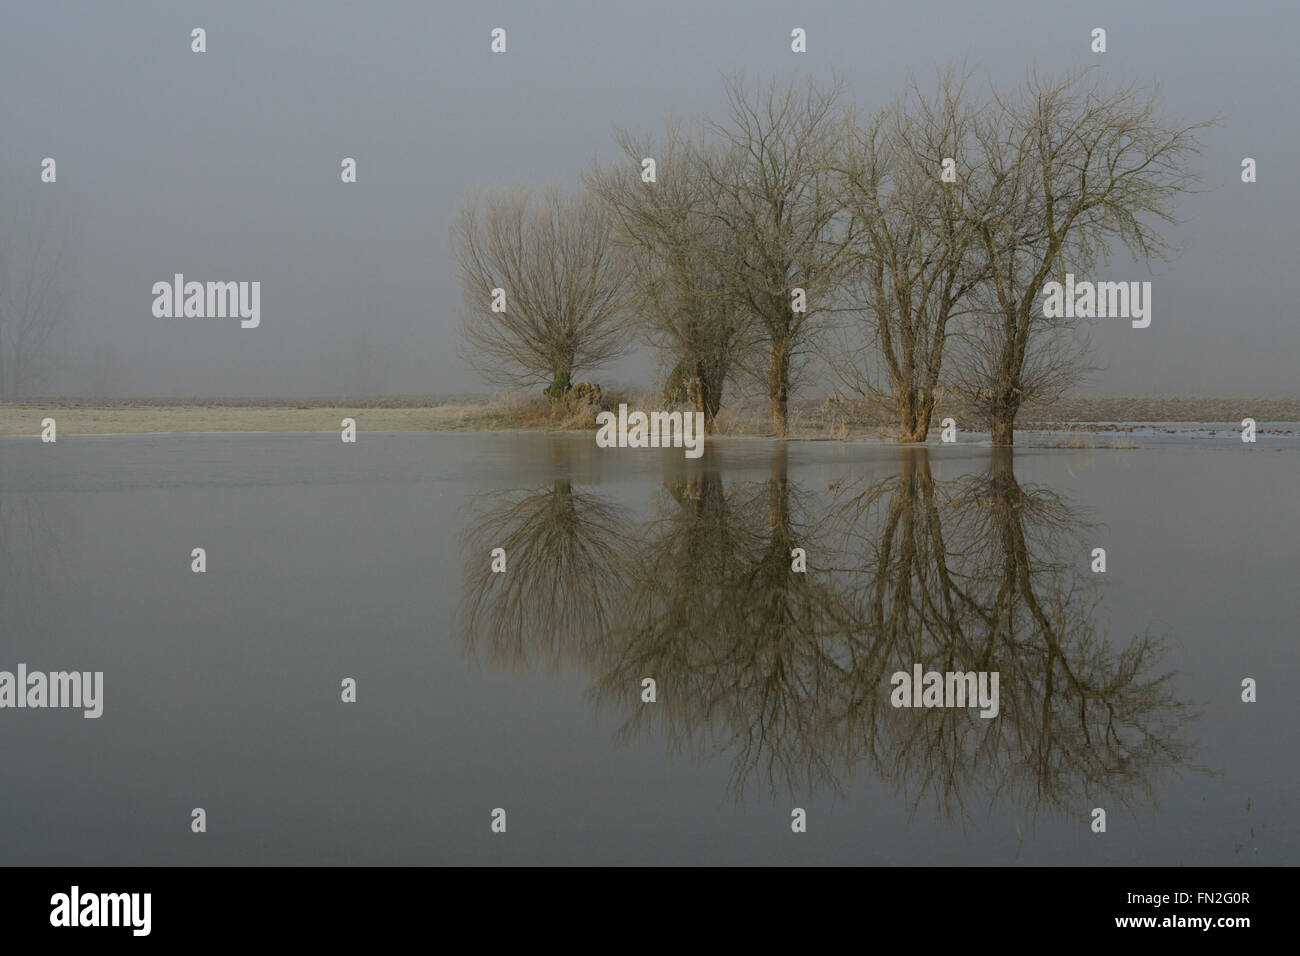 Flooded farmland with solitary trees on a typical ice cold misty winter morning at Lower Rhine Region, Germany. Stock Photo